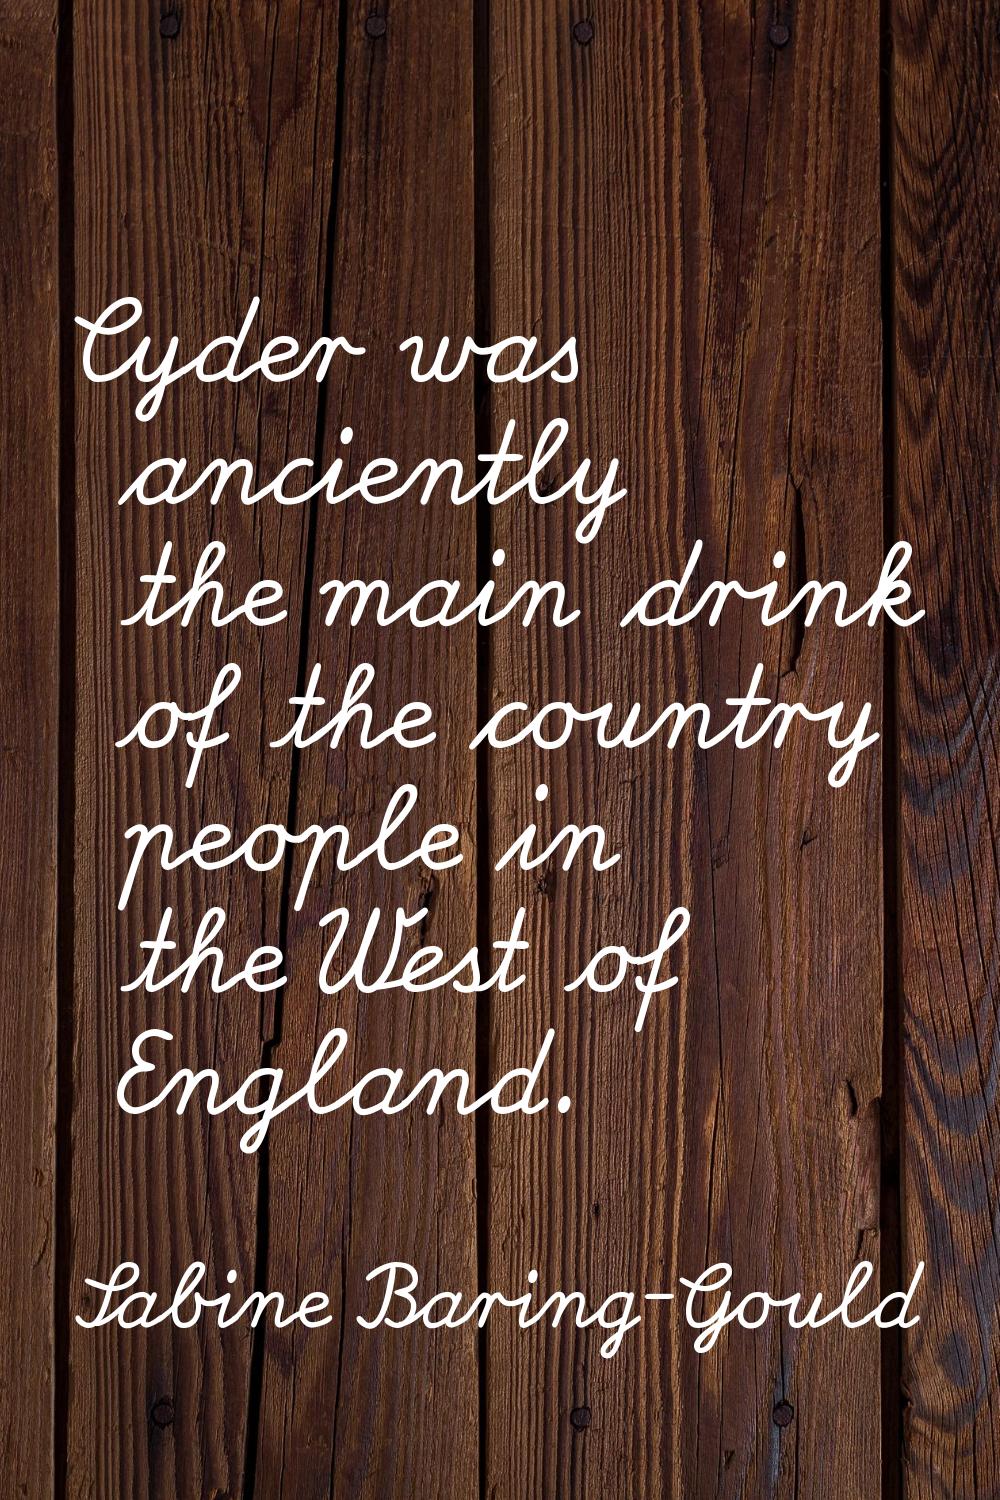 Cyder was anciently the main drink of the country people in the West of England.